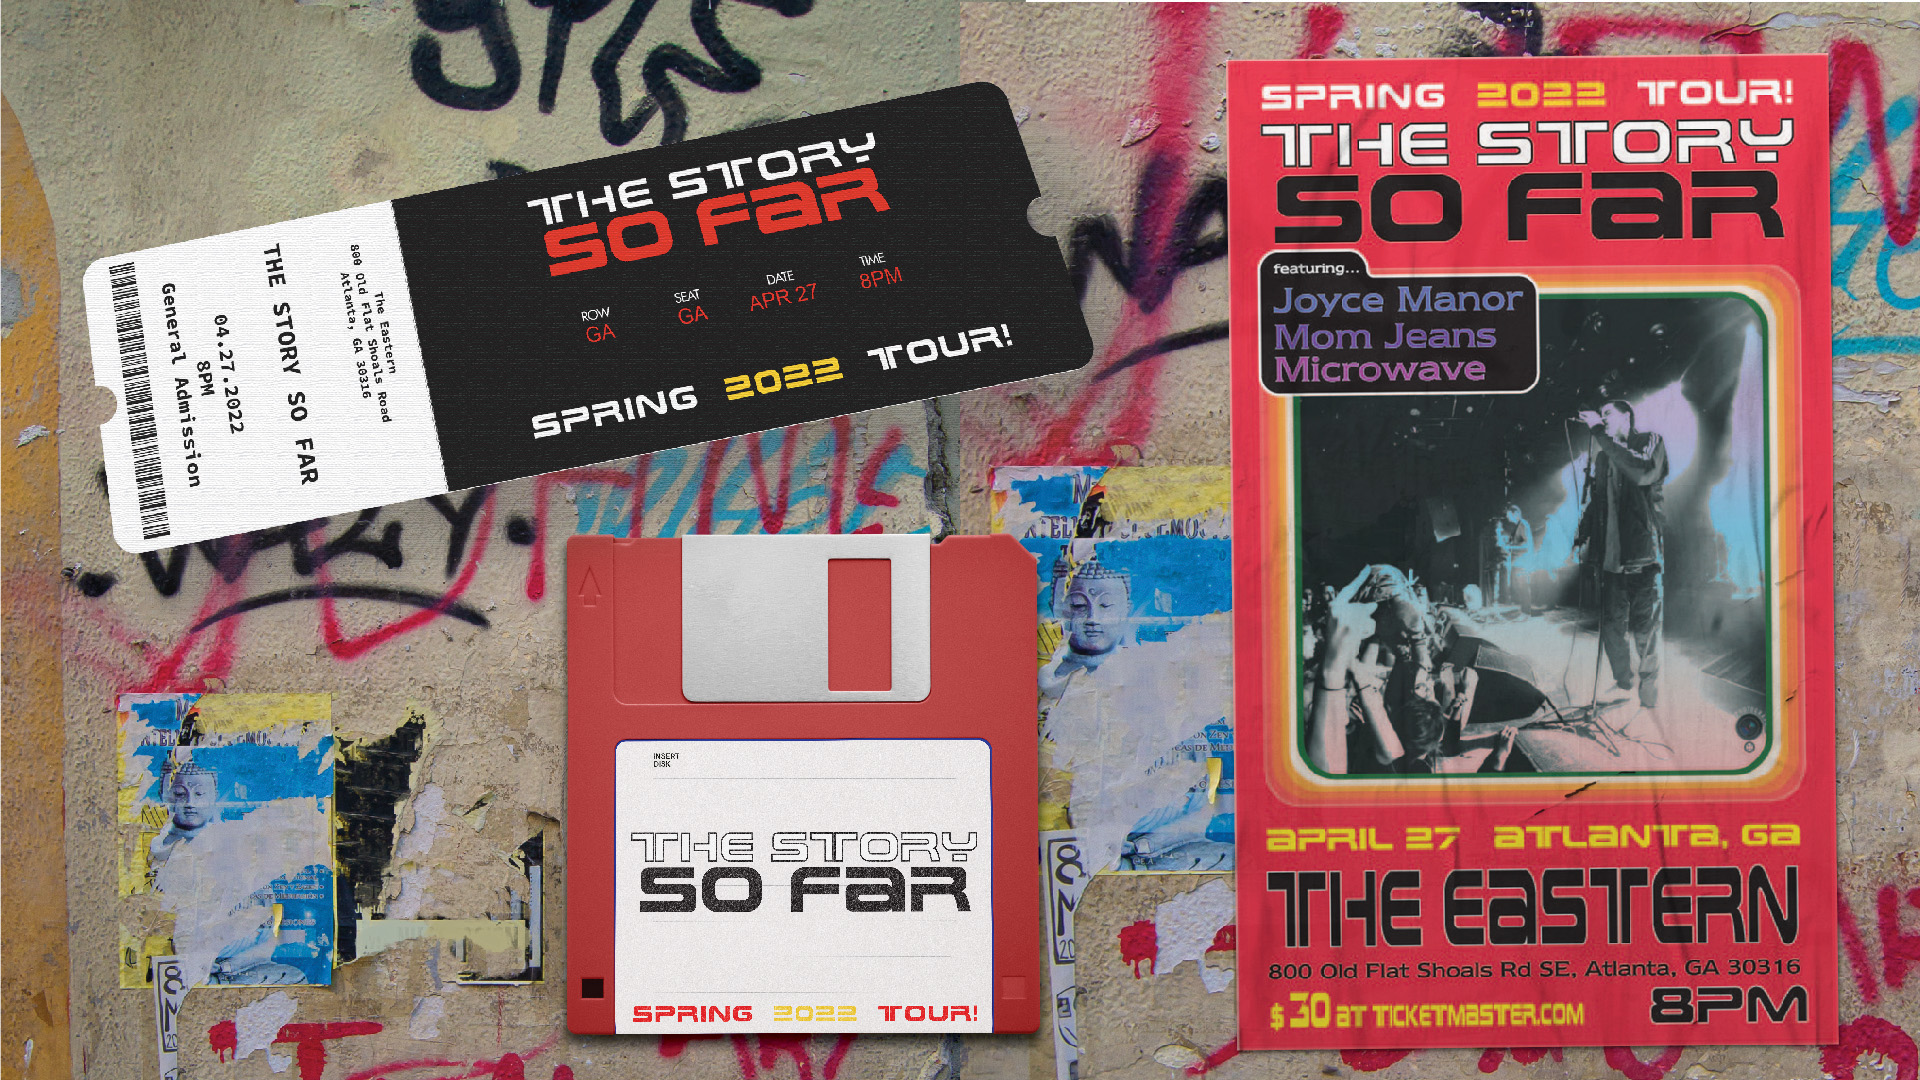 The Story So Far Concert Flyer / "The Story So Far Concert Flyer," 11x17 inches, 2023. This project is a redesign of an event flyer, showcasing a commemorative ticket and floppy disk merchandise.